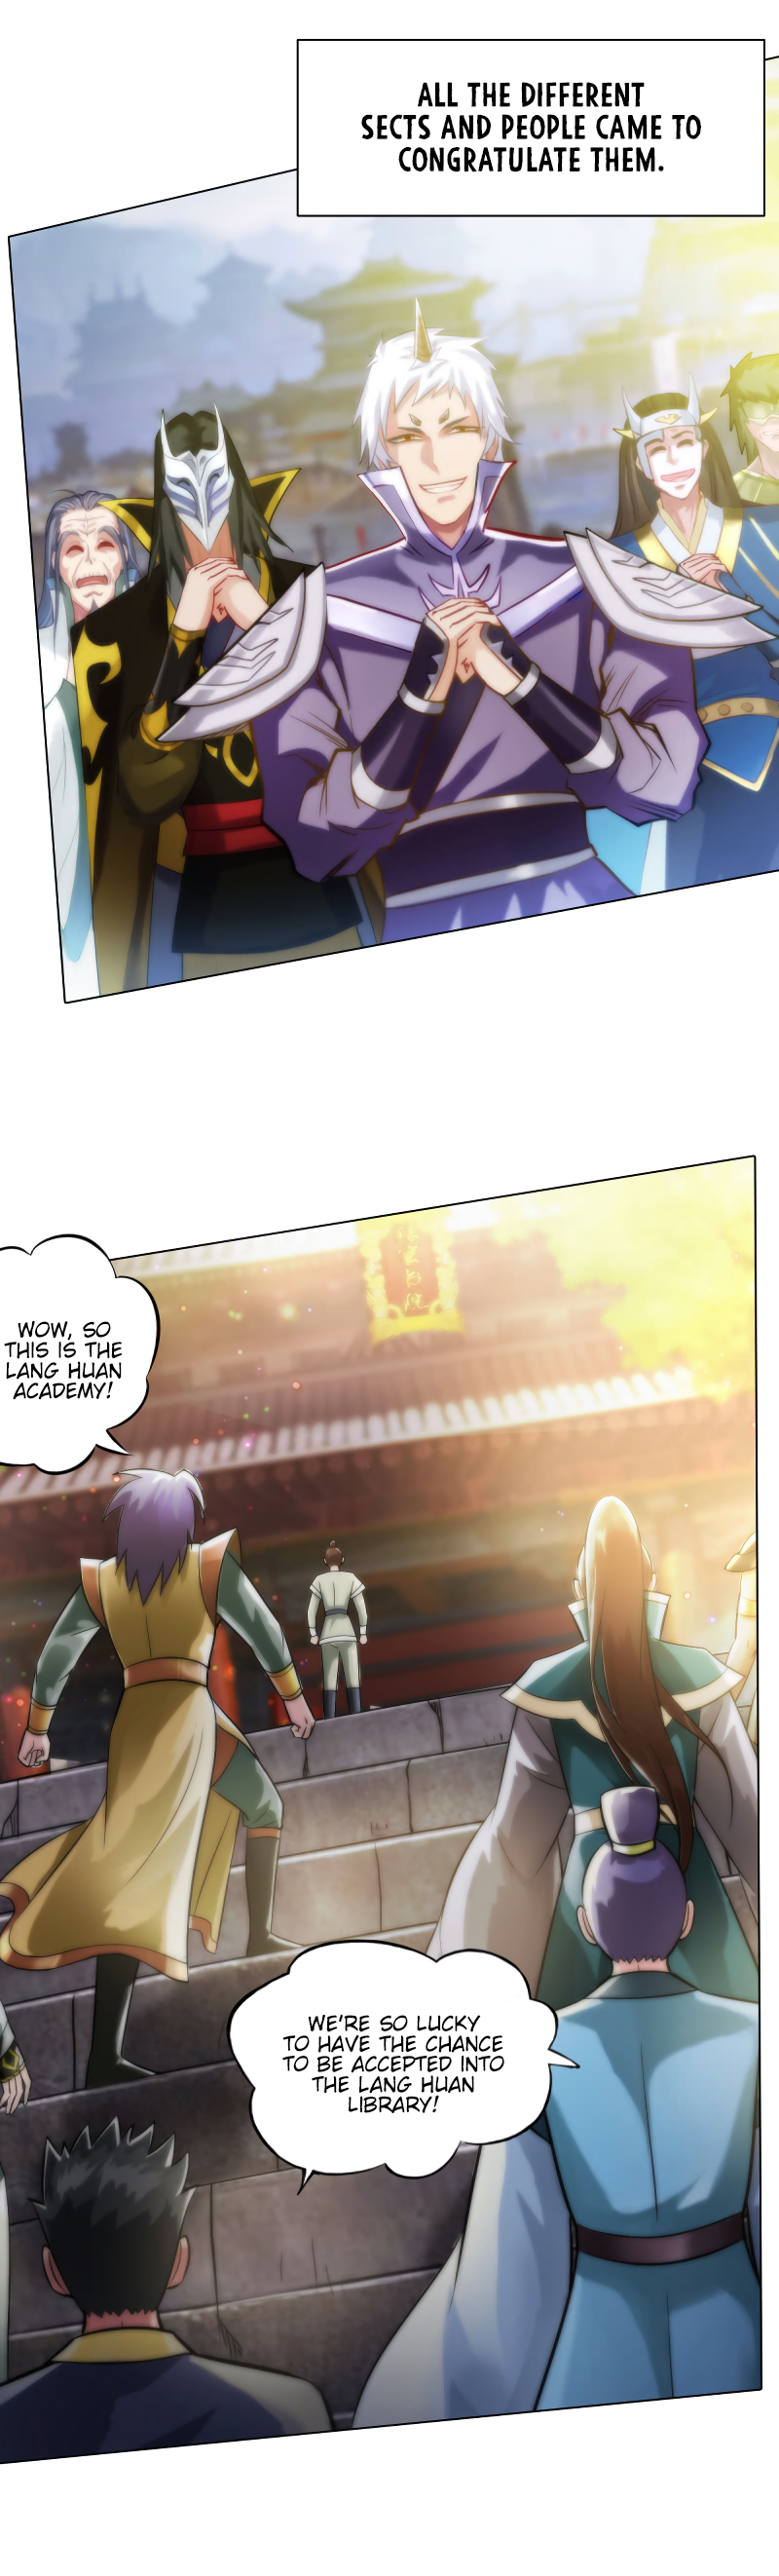 Lang Huan Library Chapter 37 page 16